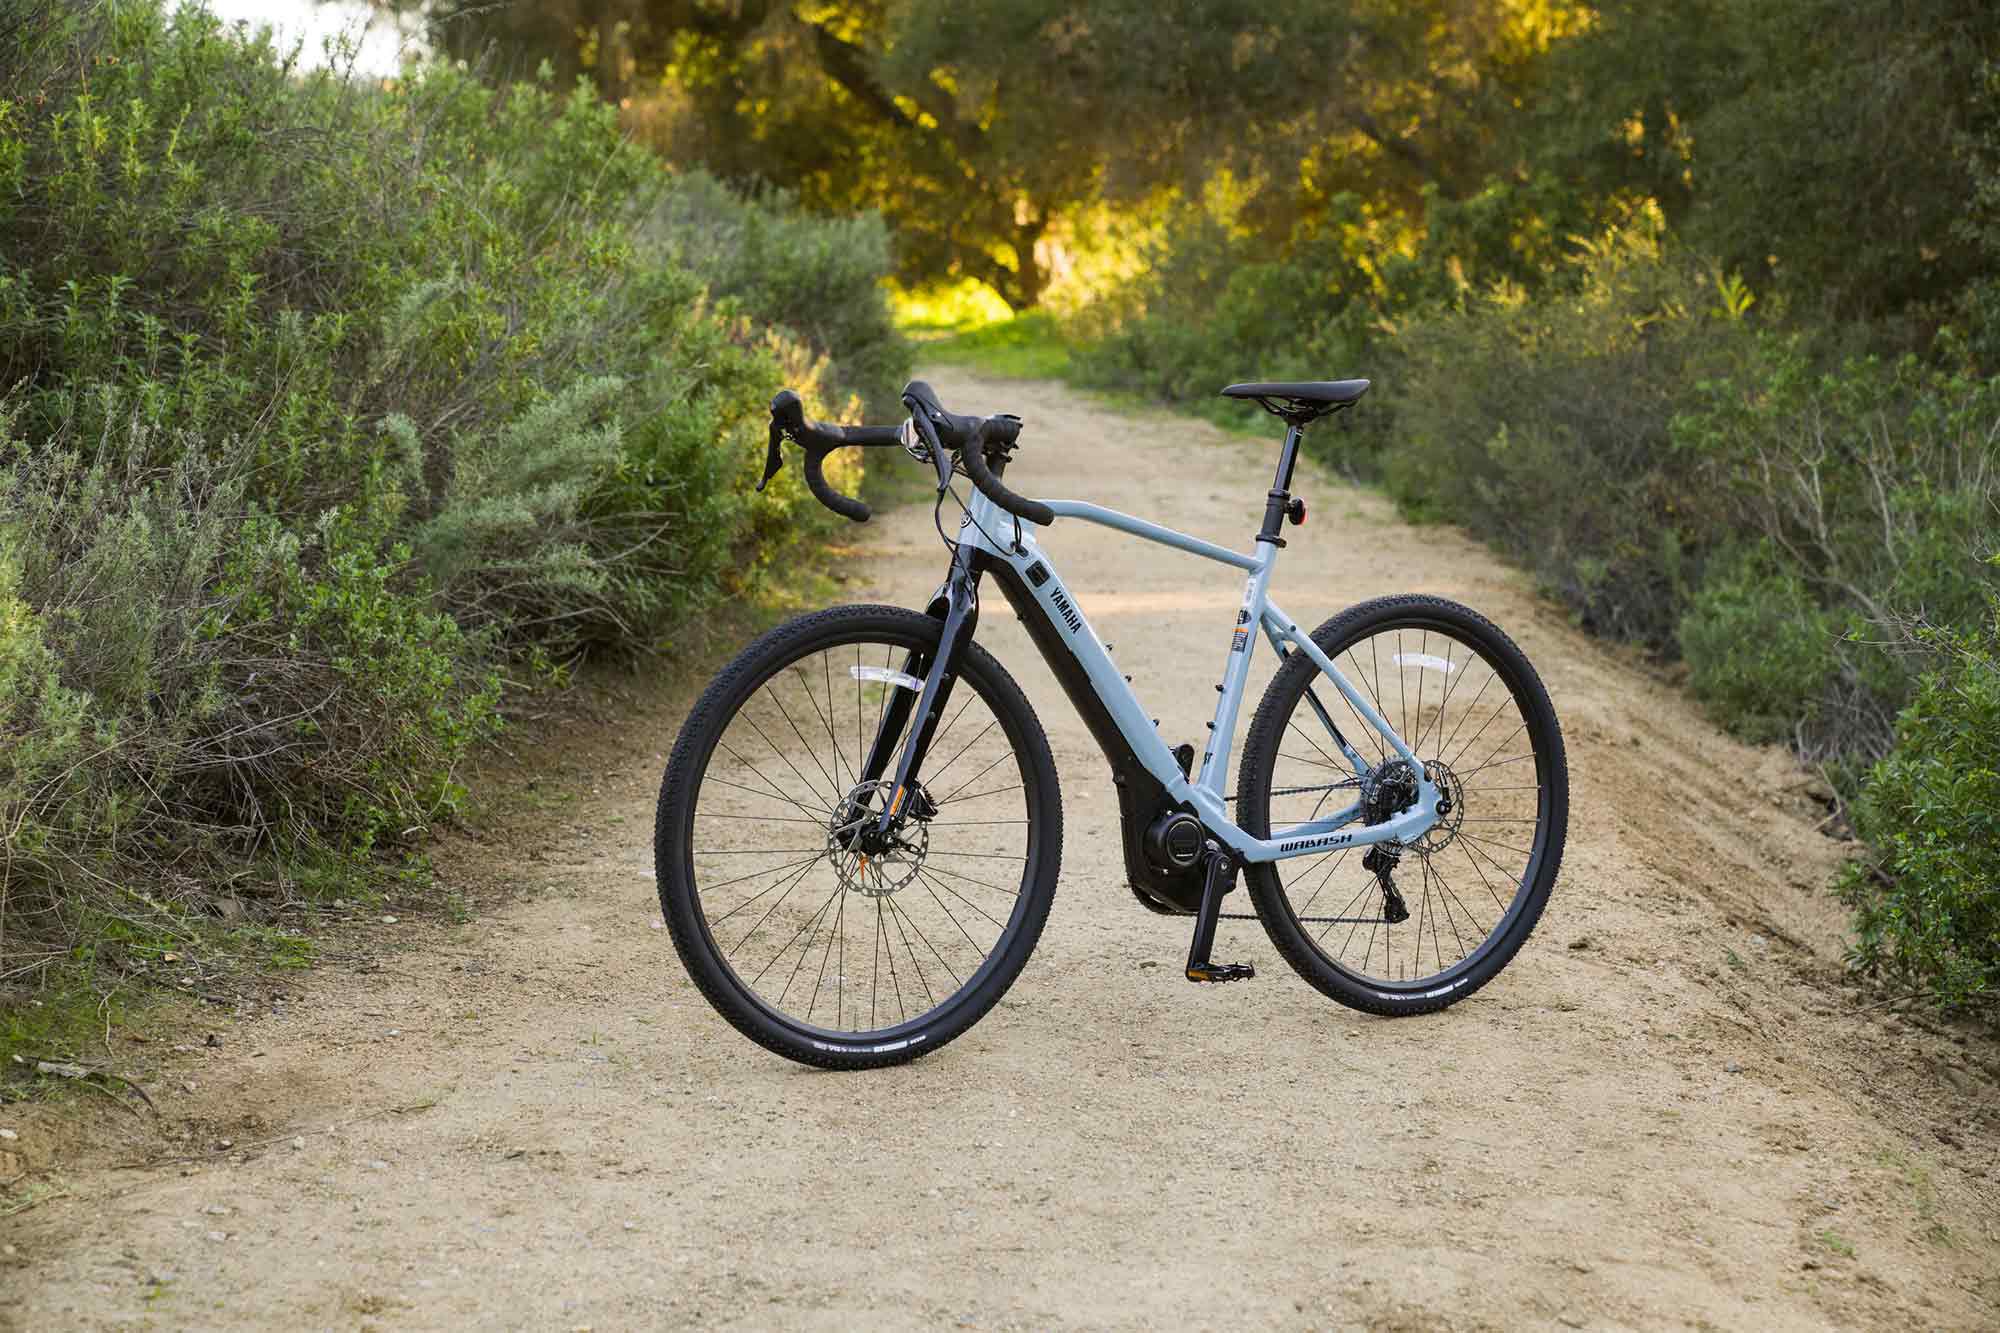 The Wabash RT on the other hand is a purpose-built gravel bike (think dual-sport) designed to be ridden on and off pavement.